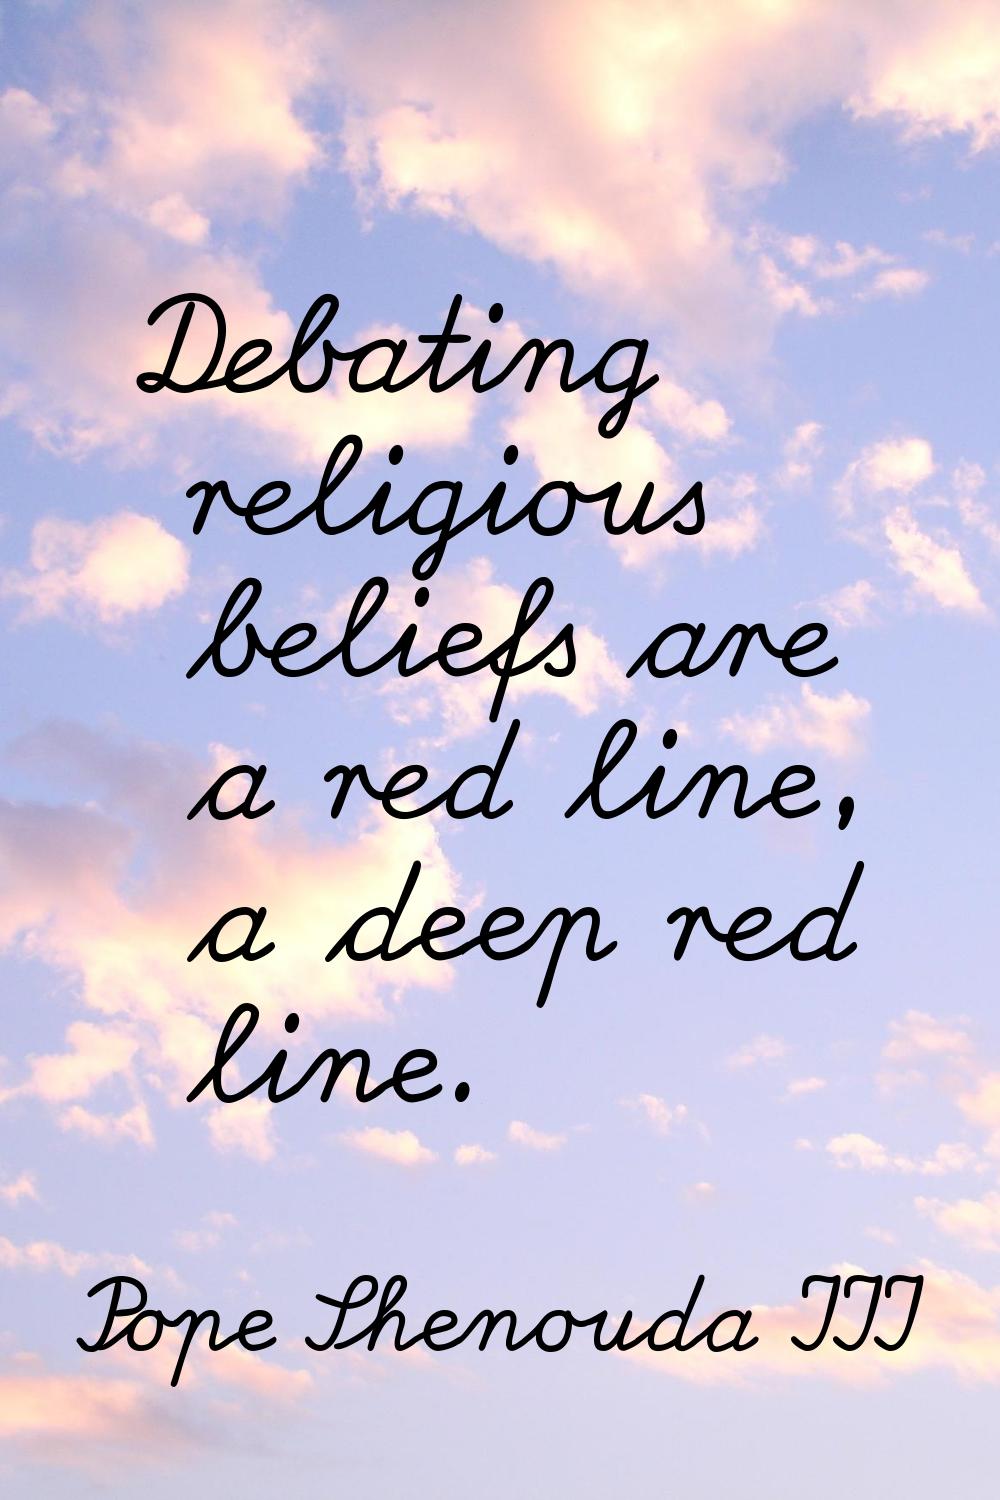 Debating religious beliefs are a red line, a deep red line.